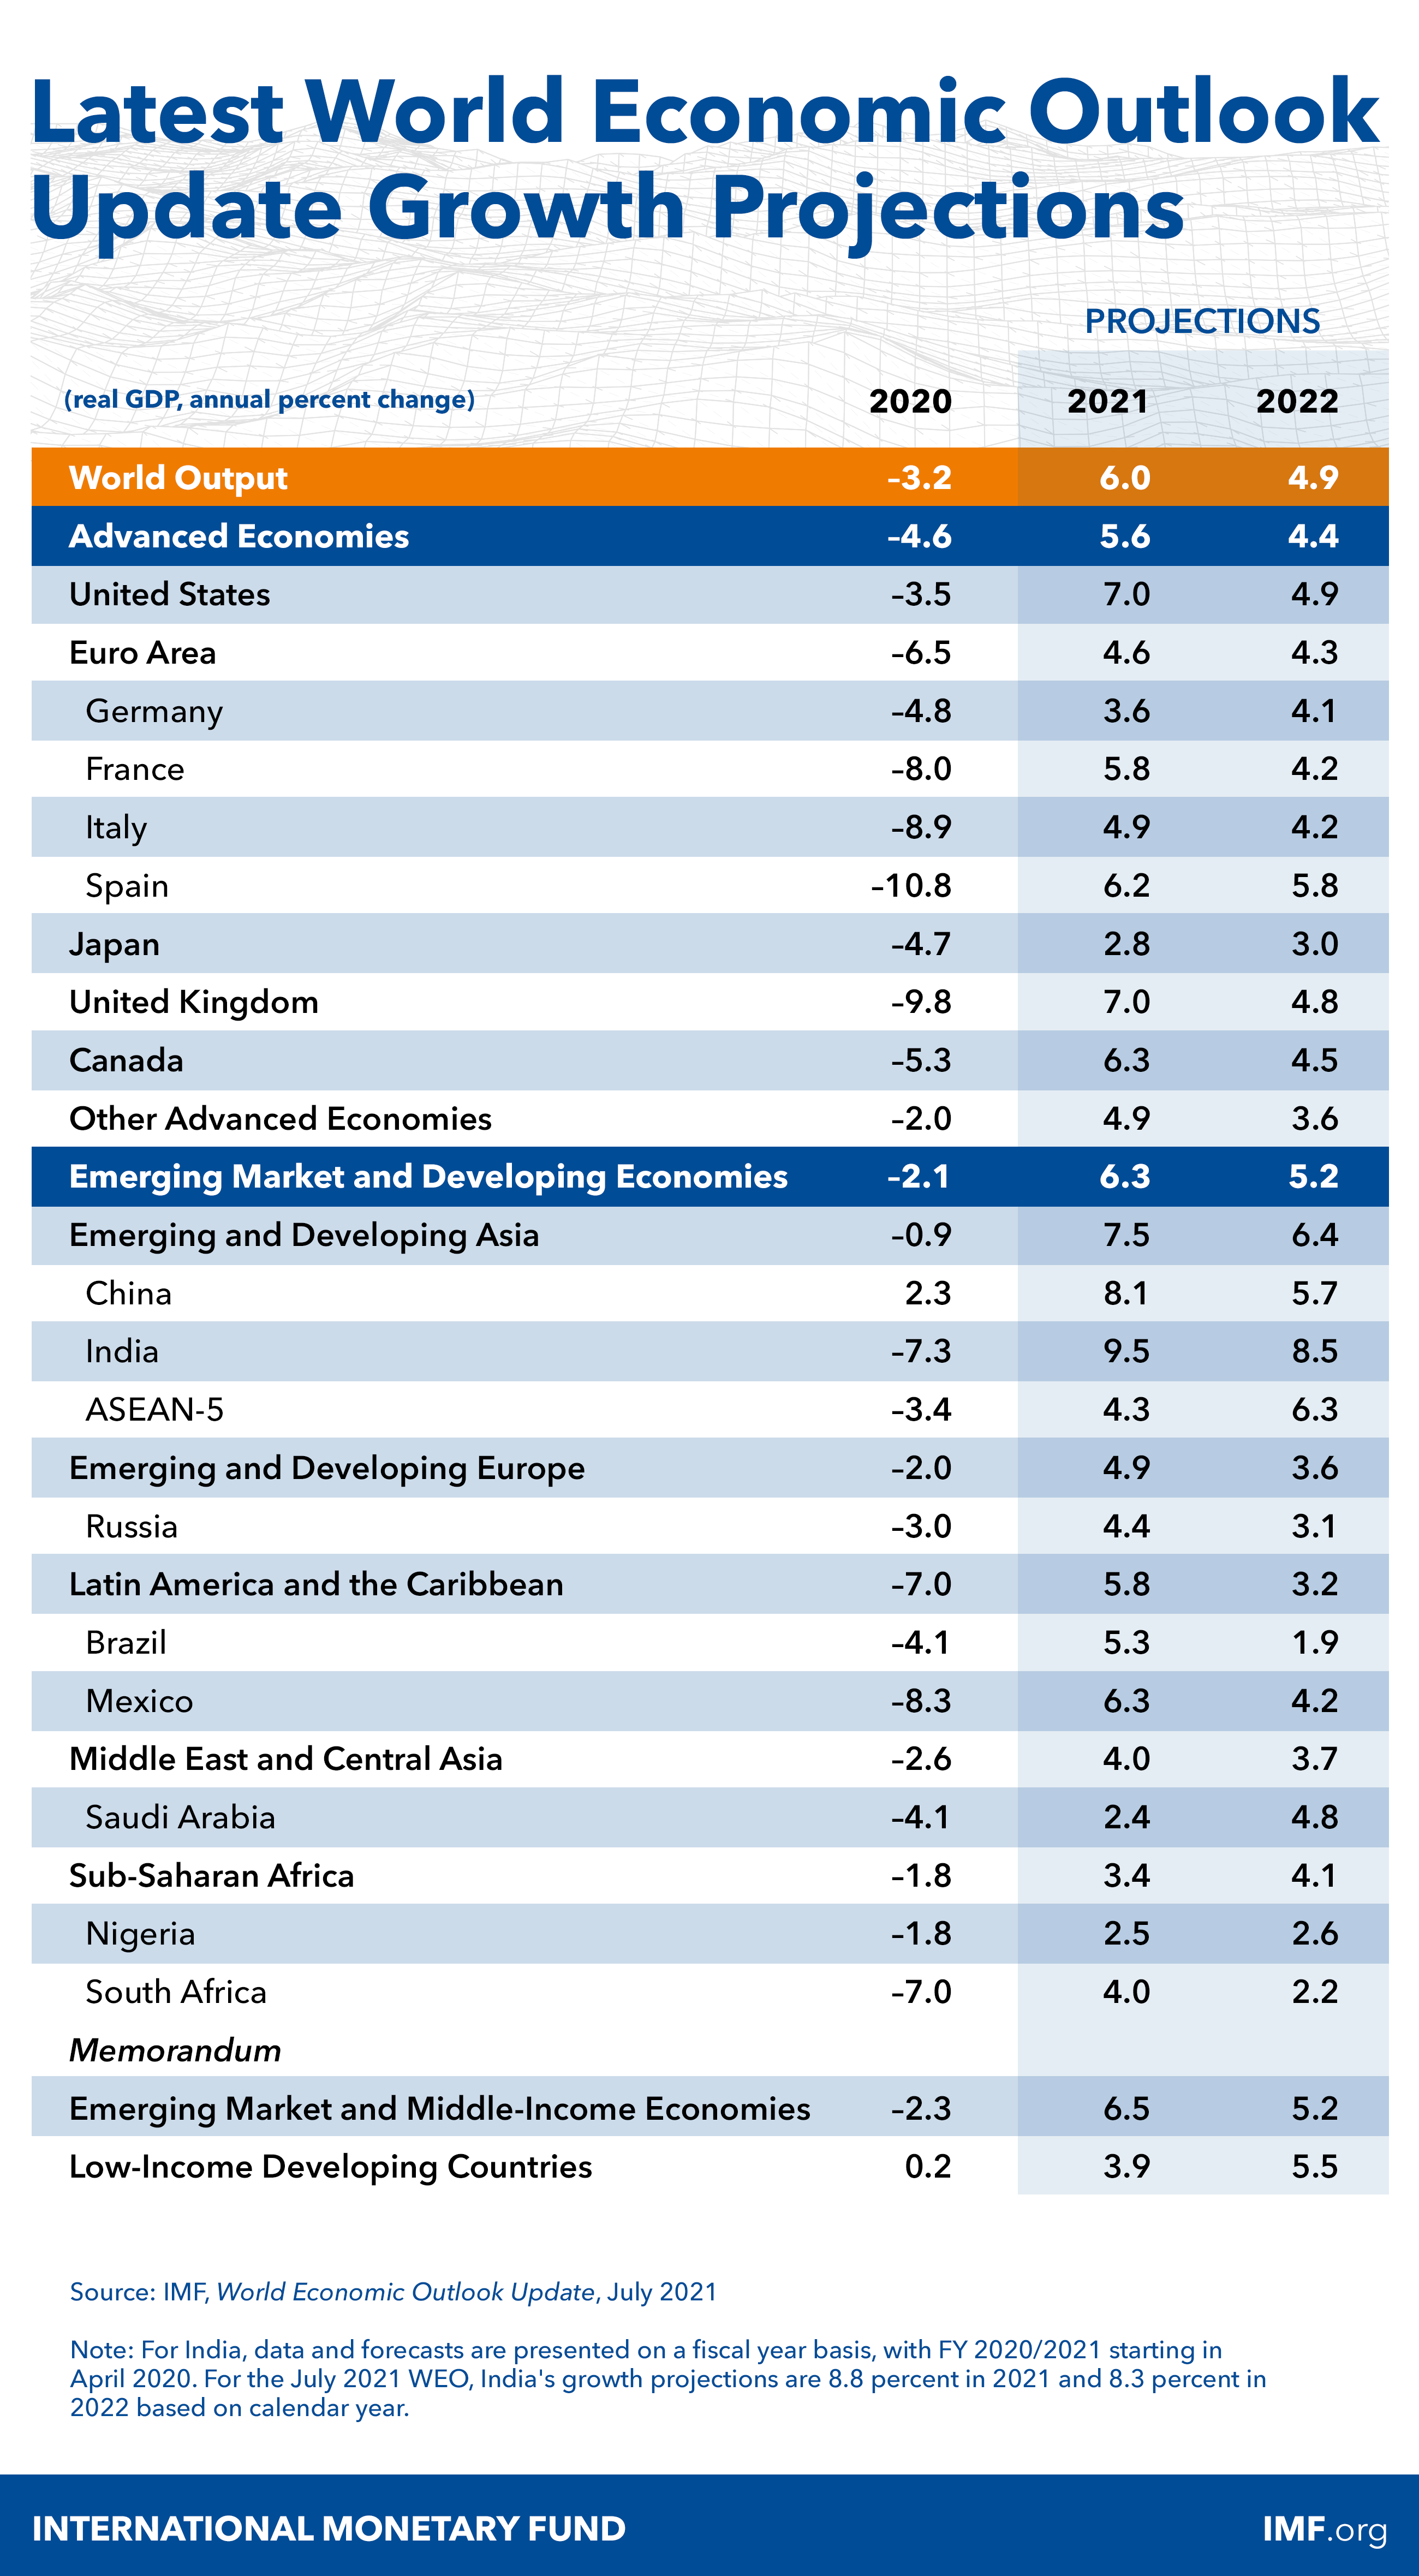 IMF World Economic Outlook 2021 Growth Projection July